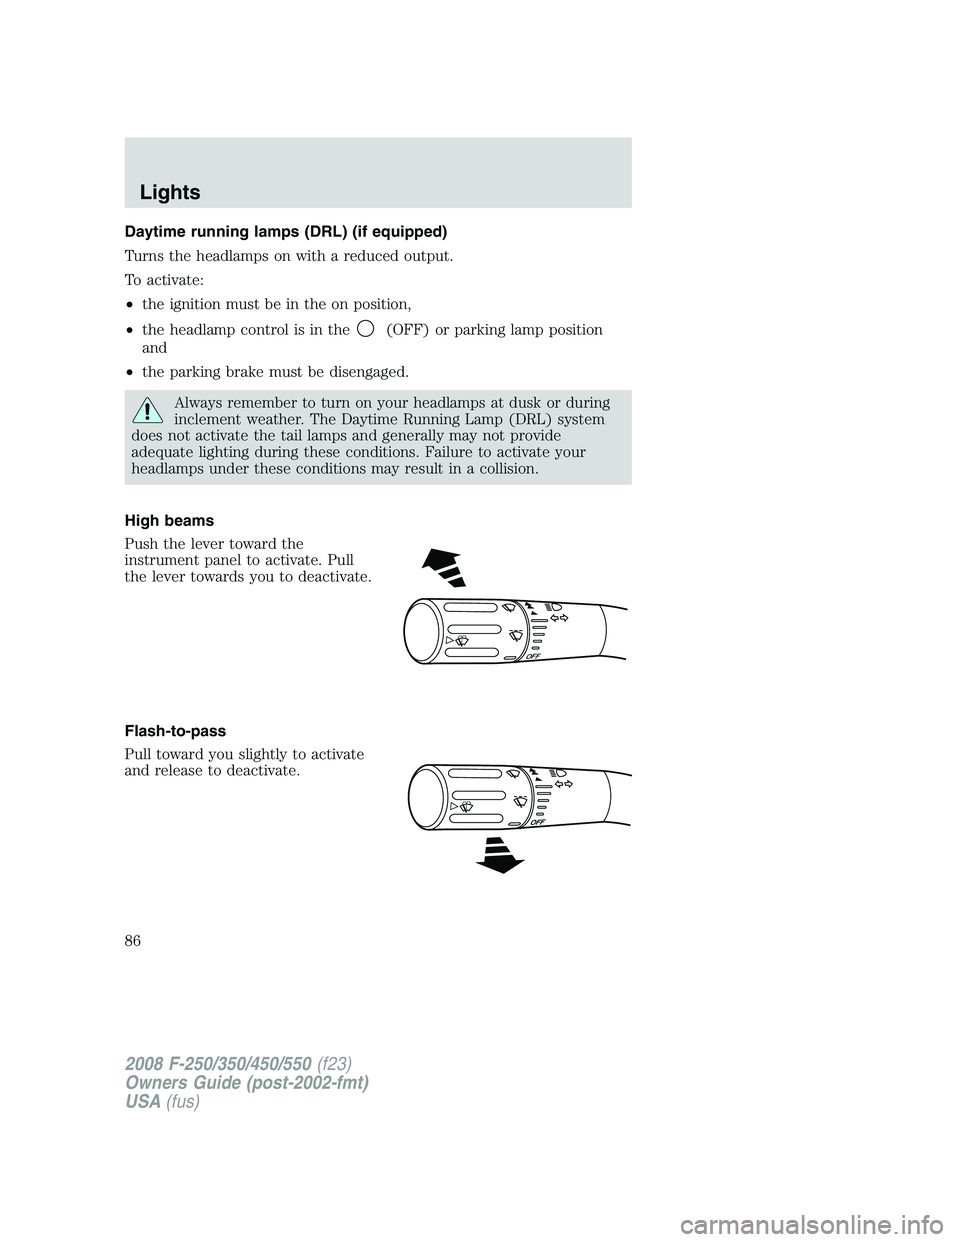 FORD F250 2008  Owners Manual Daytime running lamps (DRL) (if equipped)
Turns the headlamps on with a reduced output.
To activate:
•the ignition must be in the on position,
•the headlamp control is in the
(OFF) or parking lamp